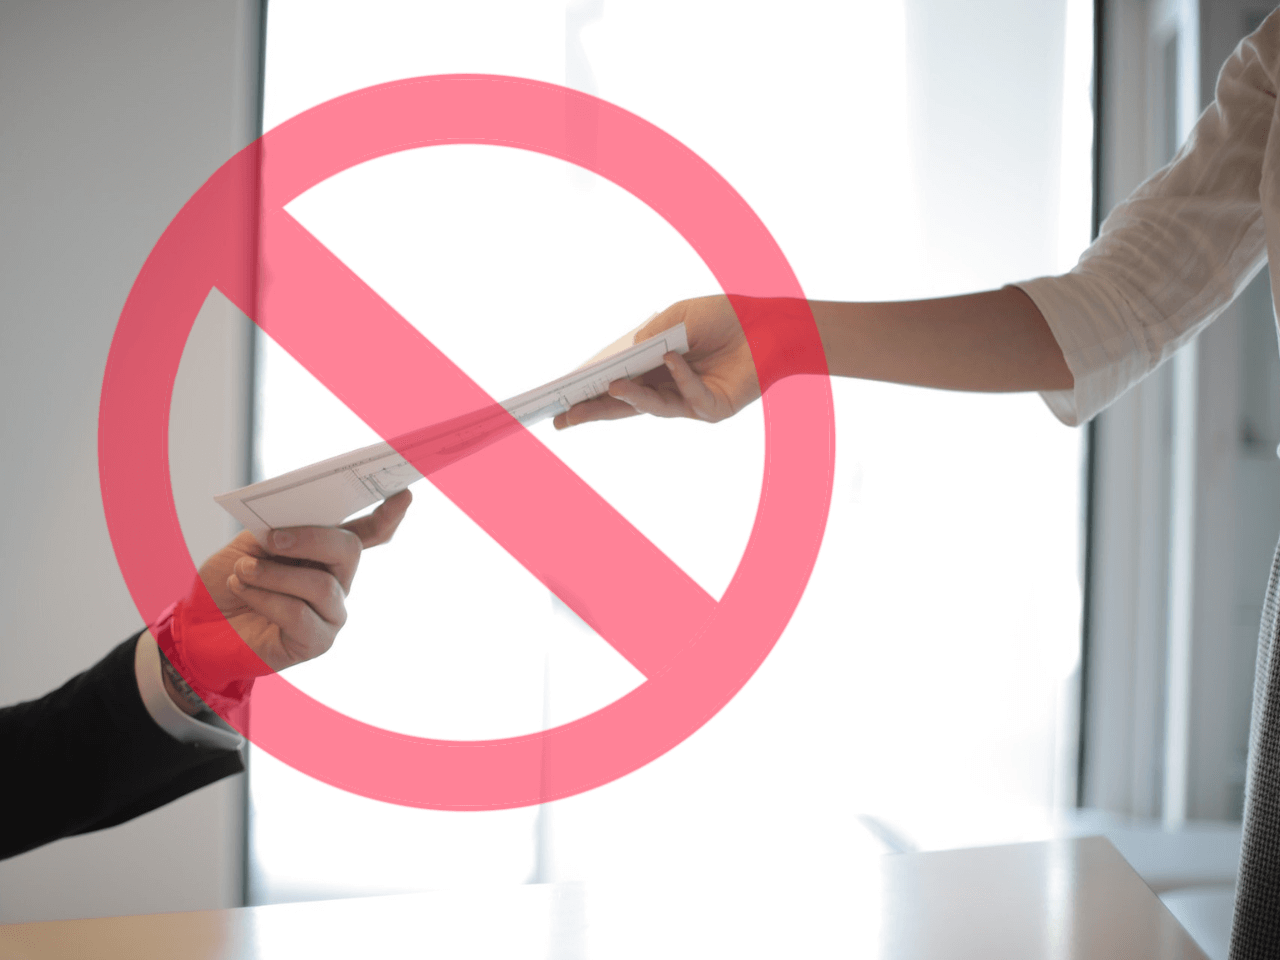 Permalink to: Counteroffers: 5 reasons your answer should be NO